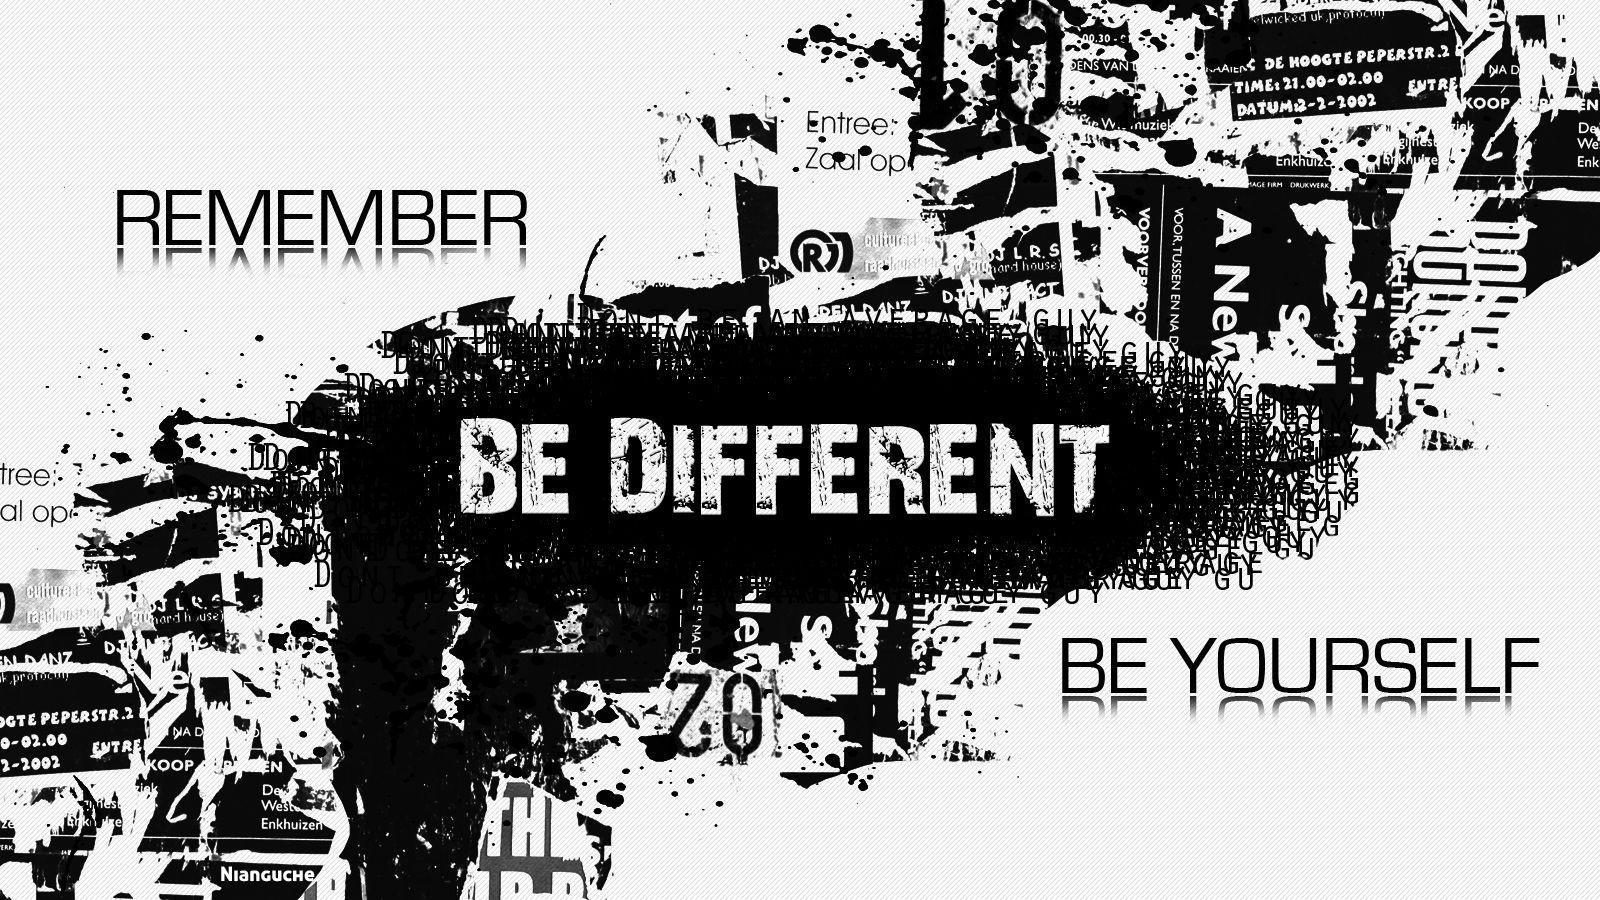 Be Yourself Image, Picture, Photo, Wallpaper, Quotes